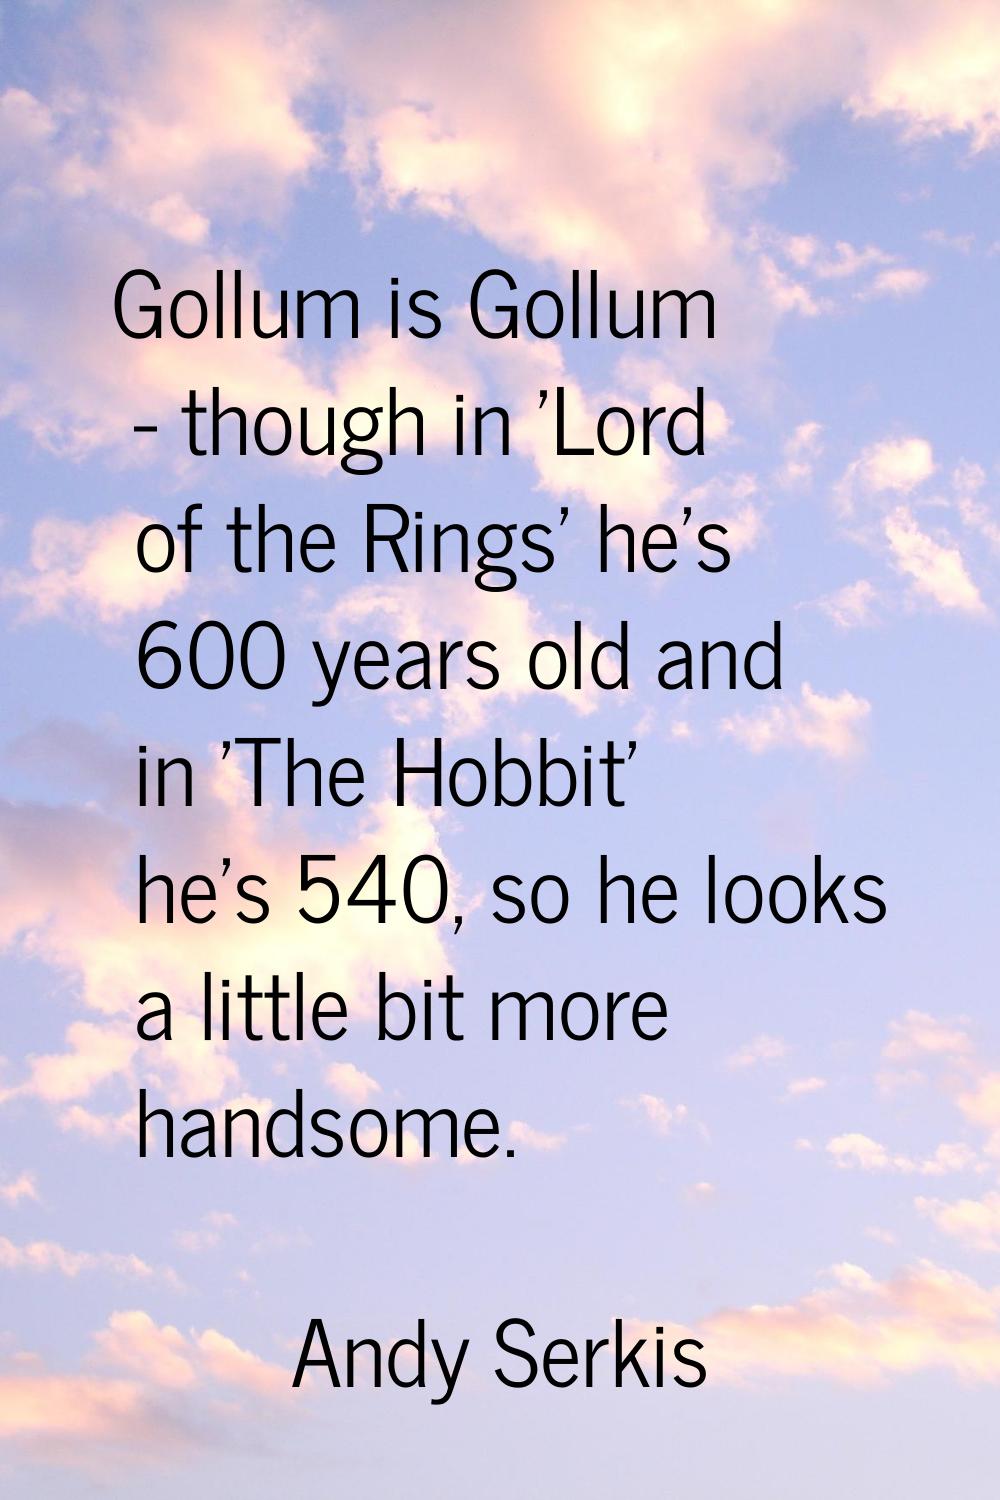 Gollum is Gollum - though in 'Lord of the Rings' he's 600 years old and in 'The Hobbit' he's 540, s